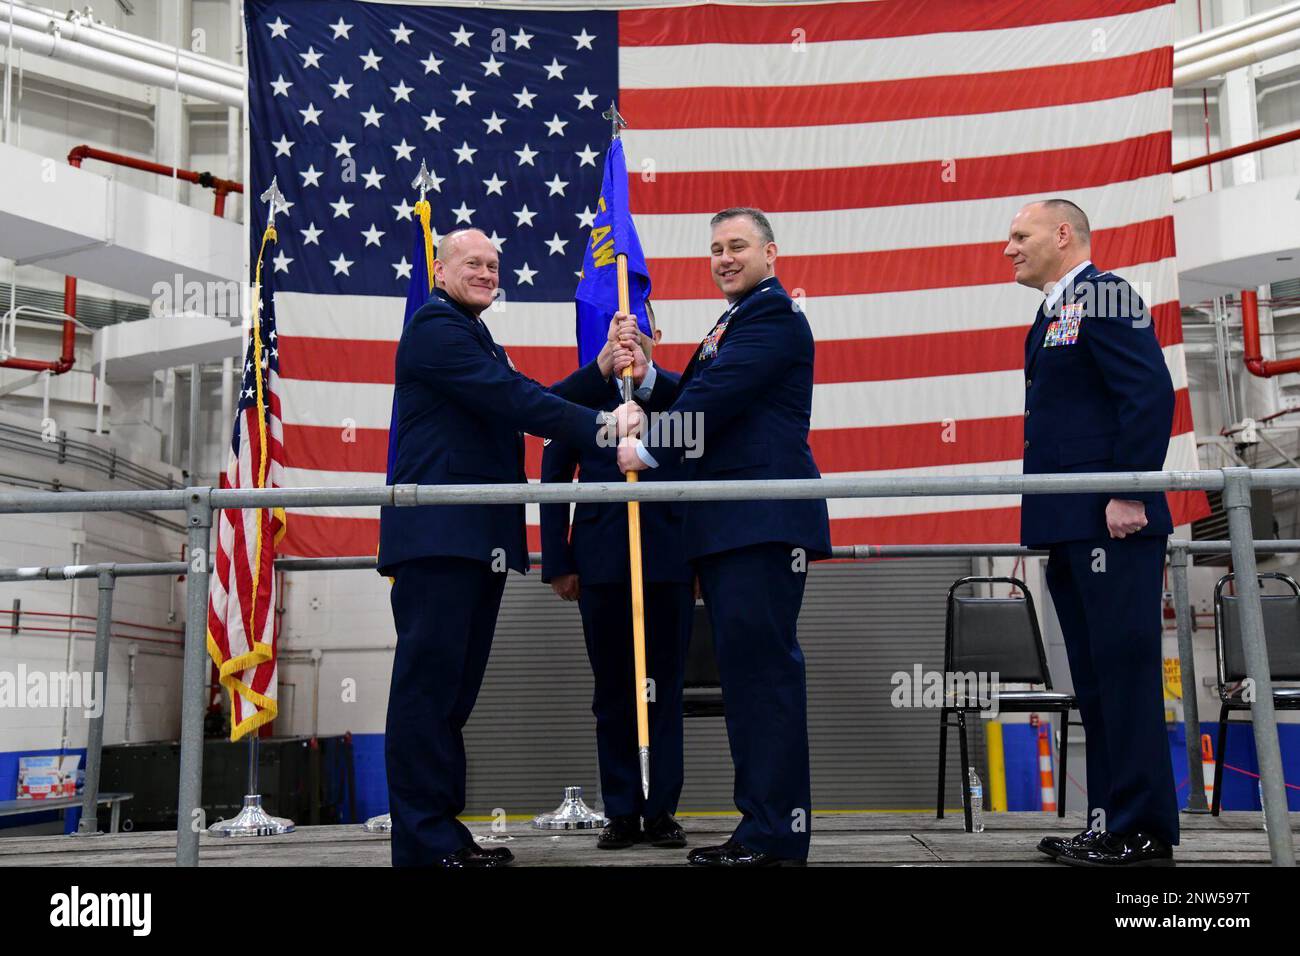 U.S. Air Force Lt. Col. Francis J. Farrelly Jr., Commander of the 105th Mission Support Group, assumes command during the 105th MSG change of command ceremony at Stewart Air National Guard Base, New York, January 8, 2023. Former 105th MSG commander U.S. Air Force Col. Edward W. Cook Jr. handed over command facilitated by U.S. Air Force Brig. Gen. Gary R. Charlton II. Stock Photo